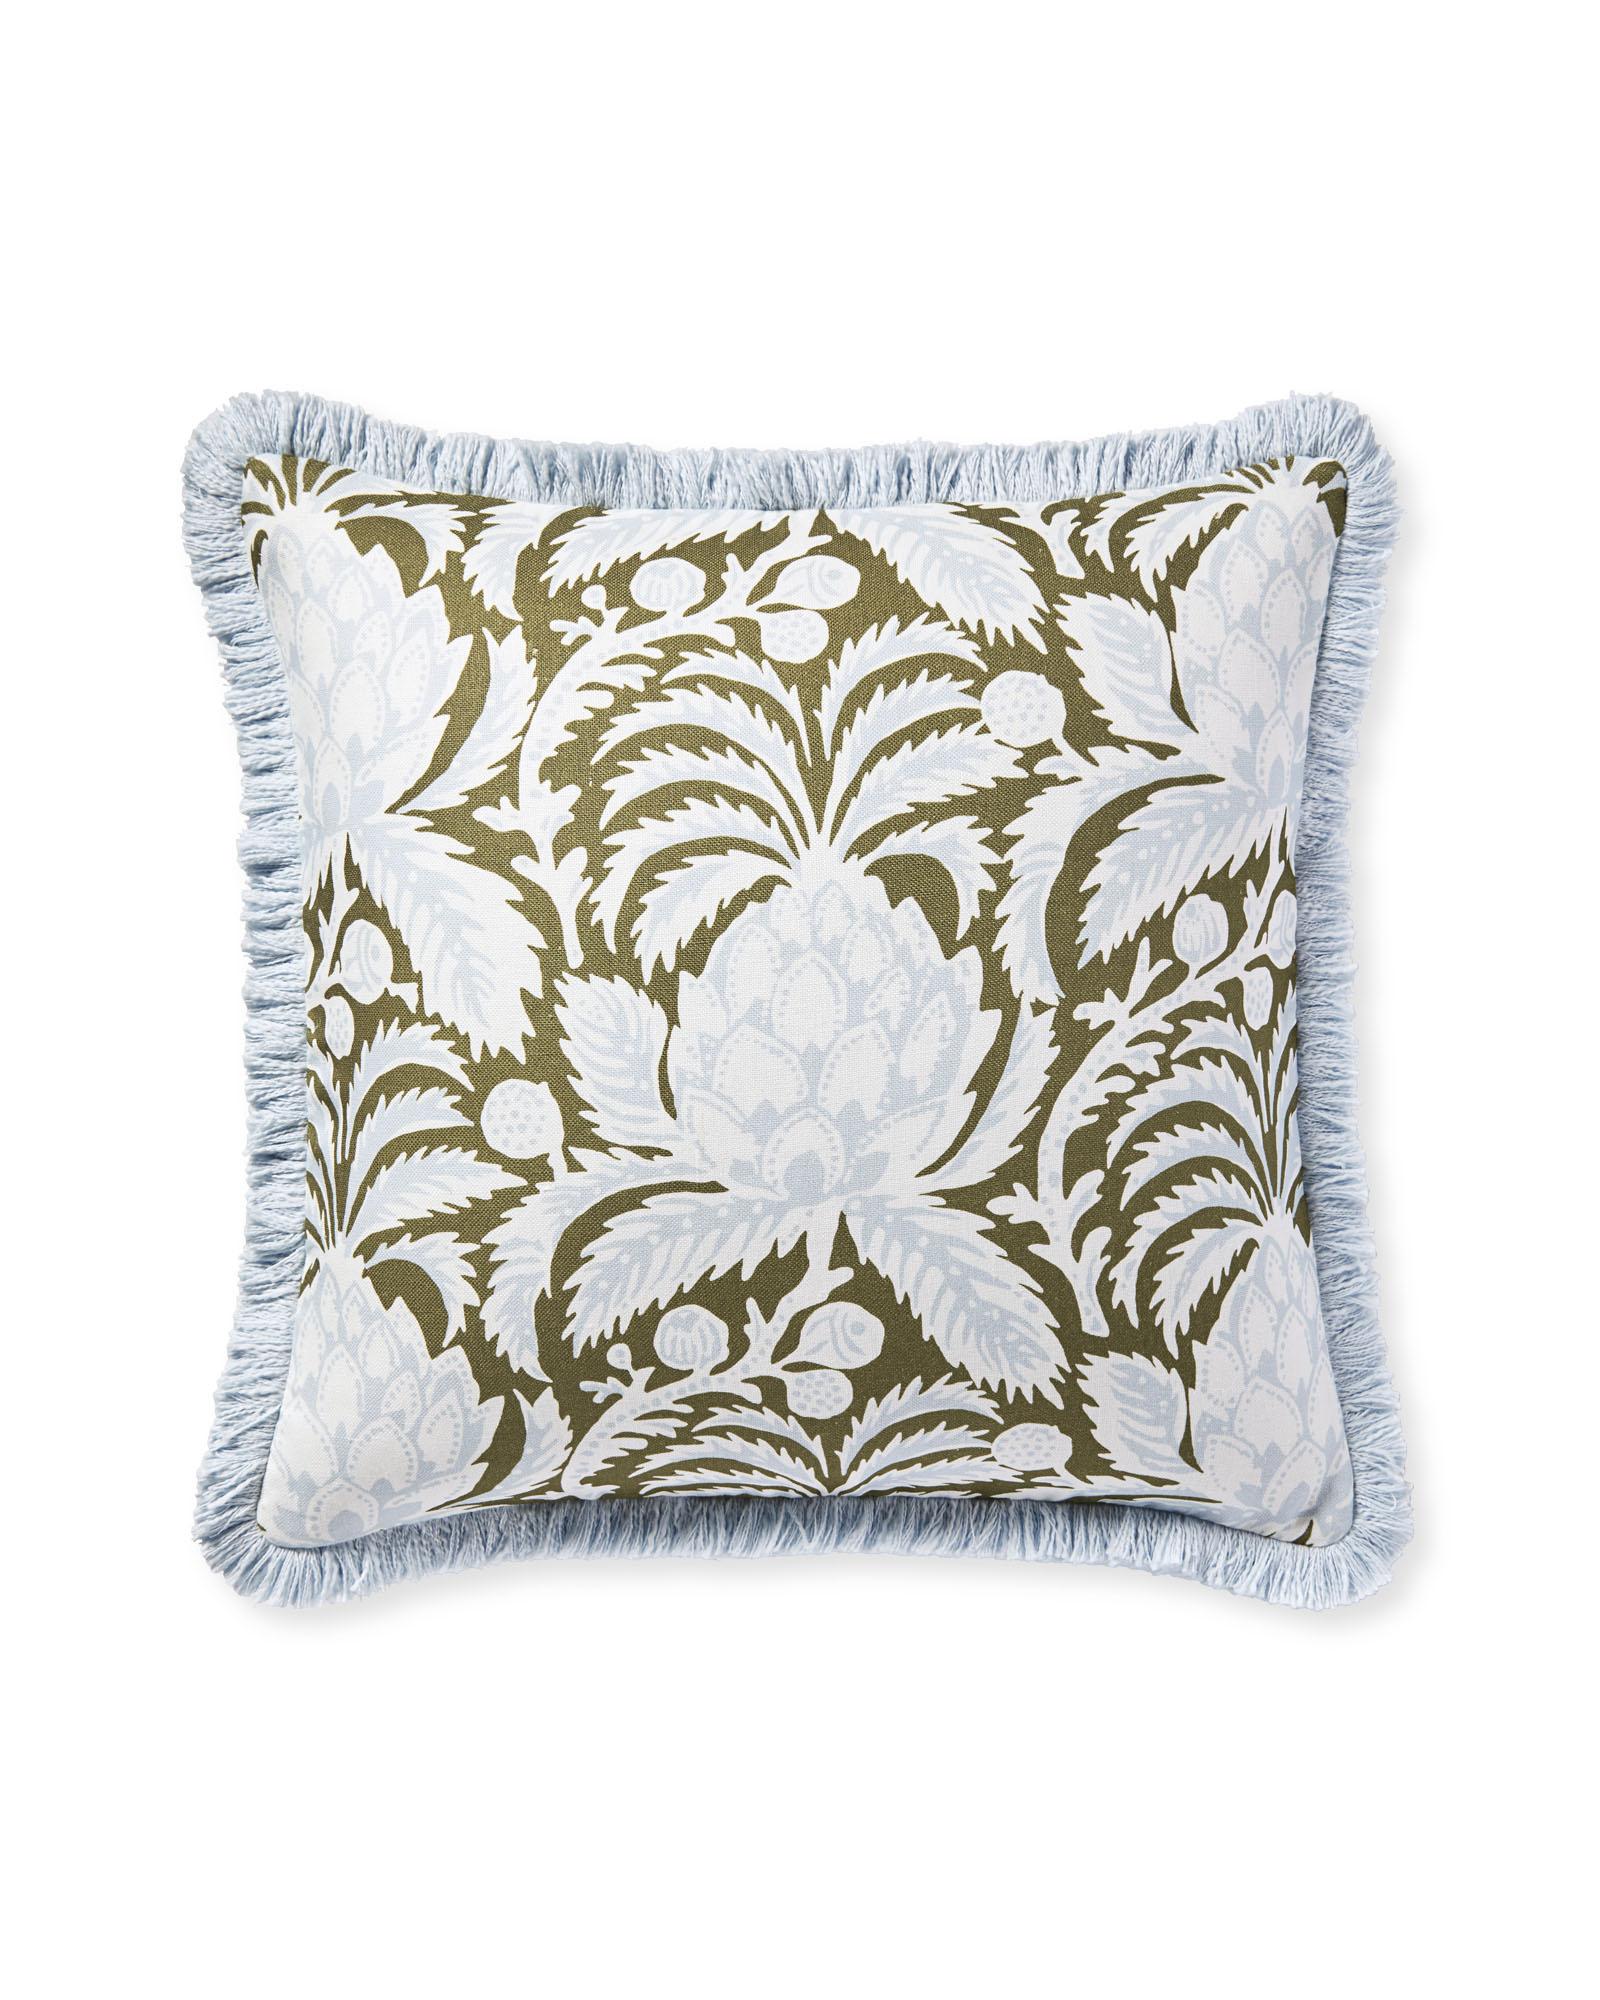 Indoor Pillow Inserts, 18 x 24 | Serena & Lily